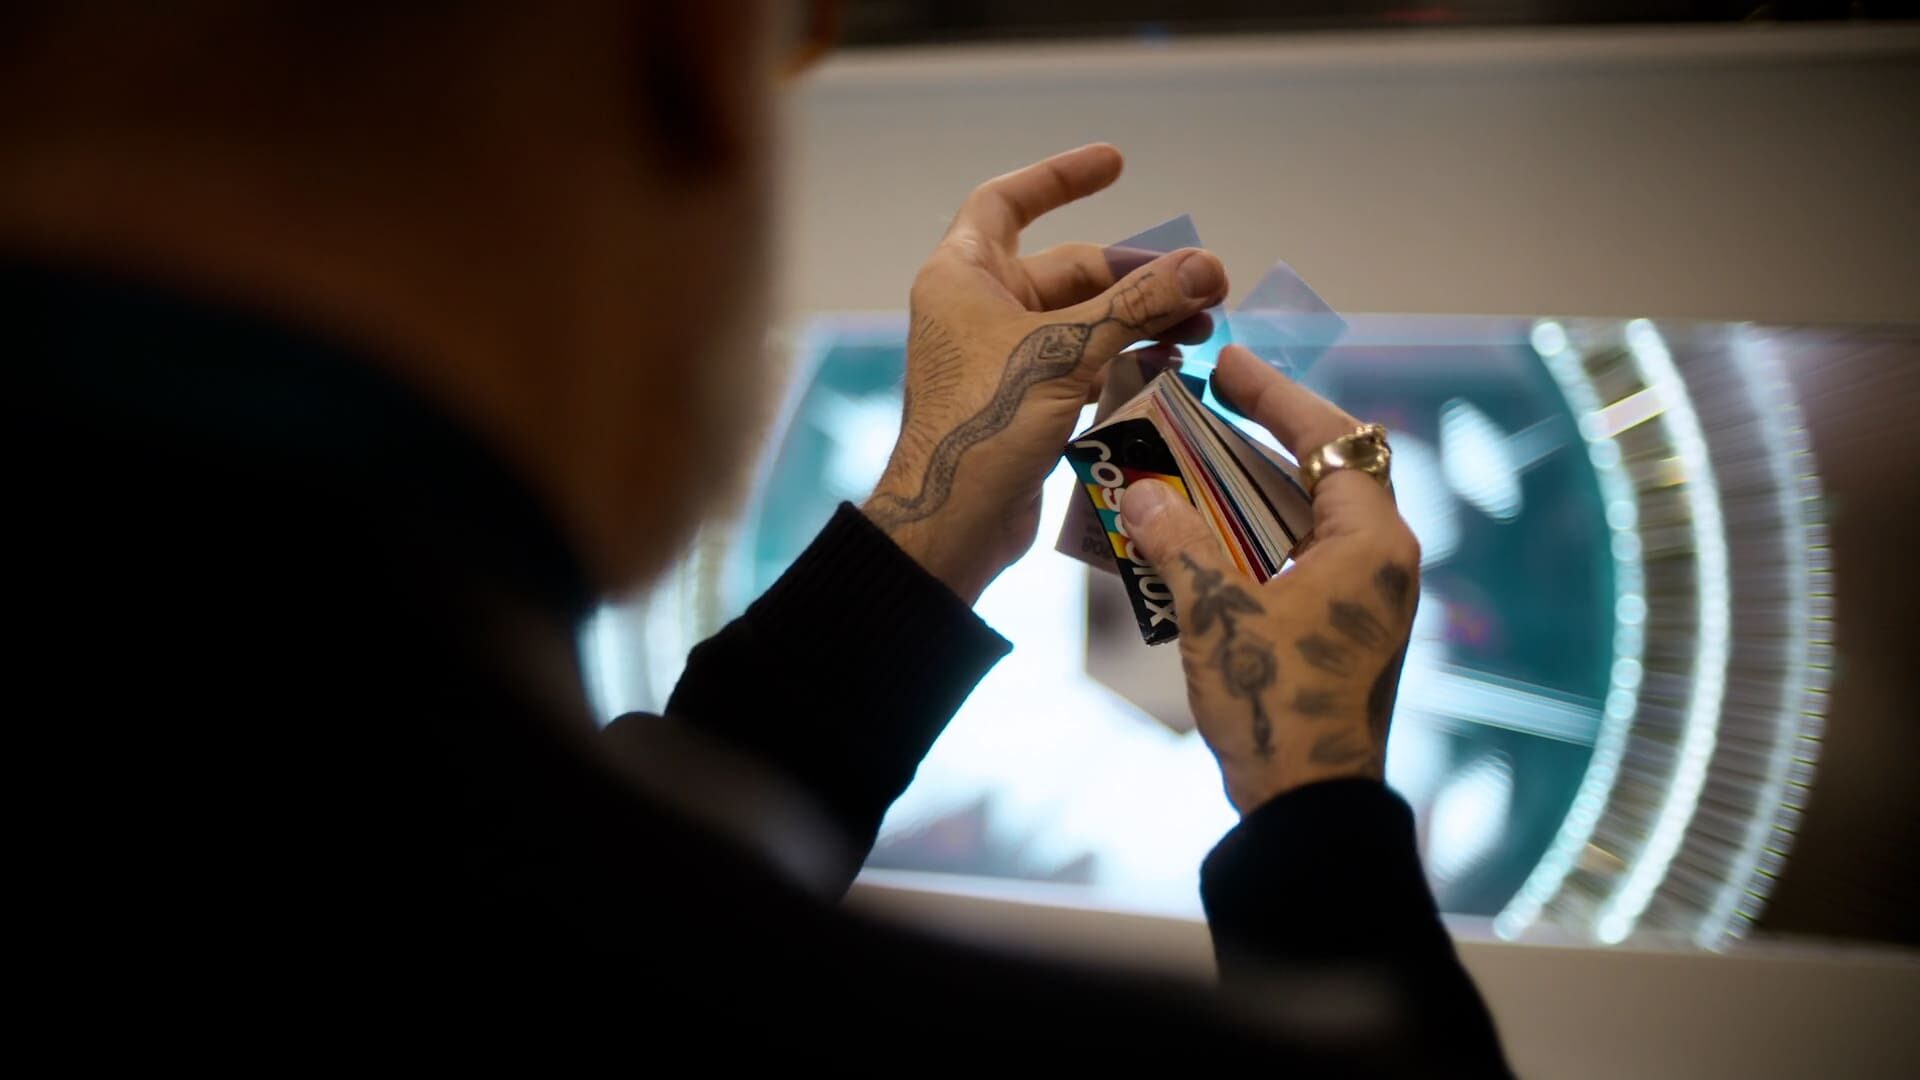 Artisan's hands with tattoos carefully selecting colorful light filters for Tiffany & Co.'s holiday window display.